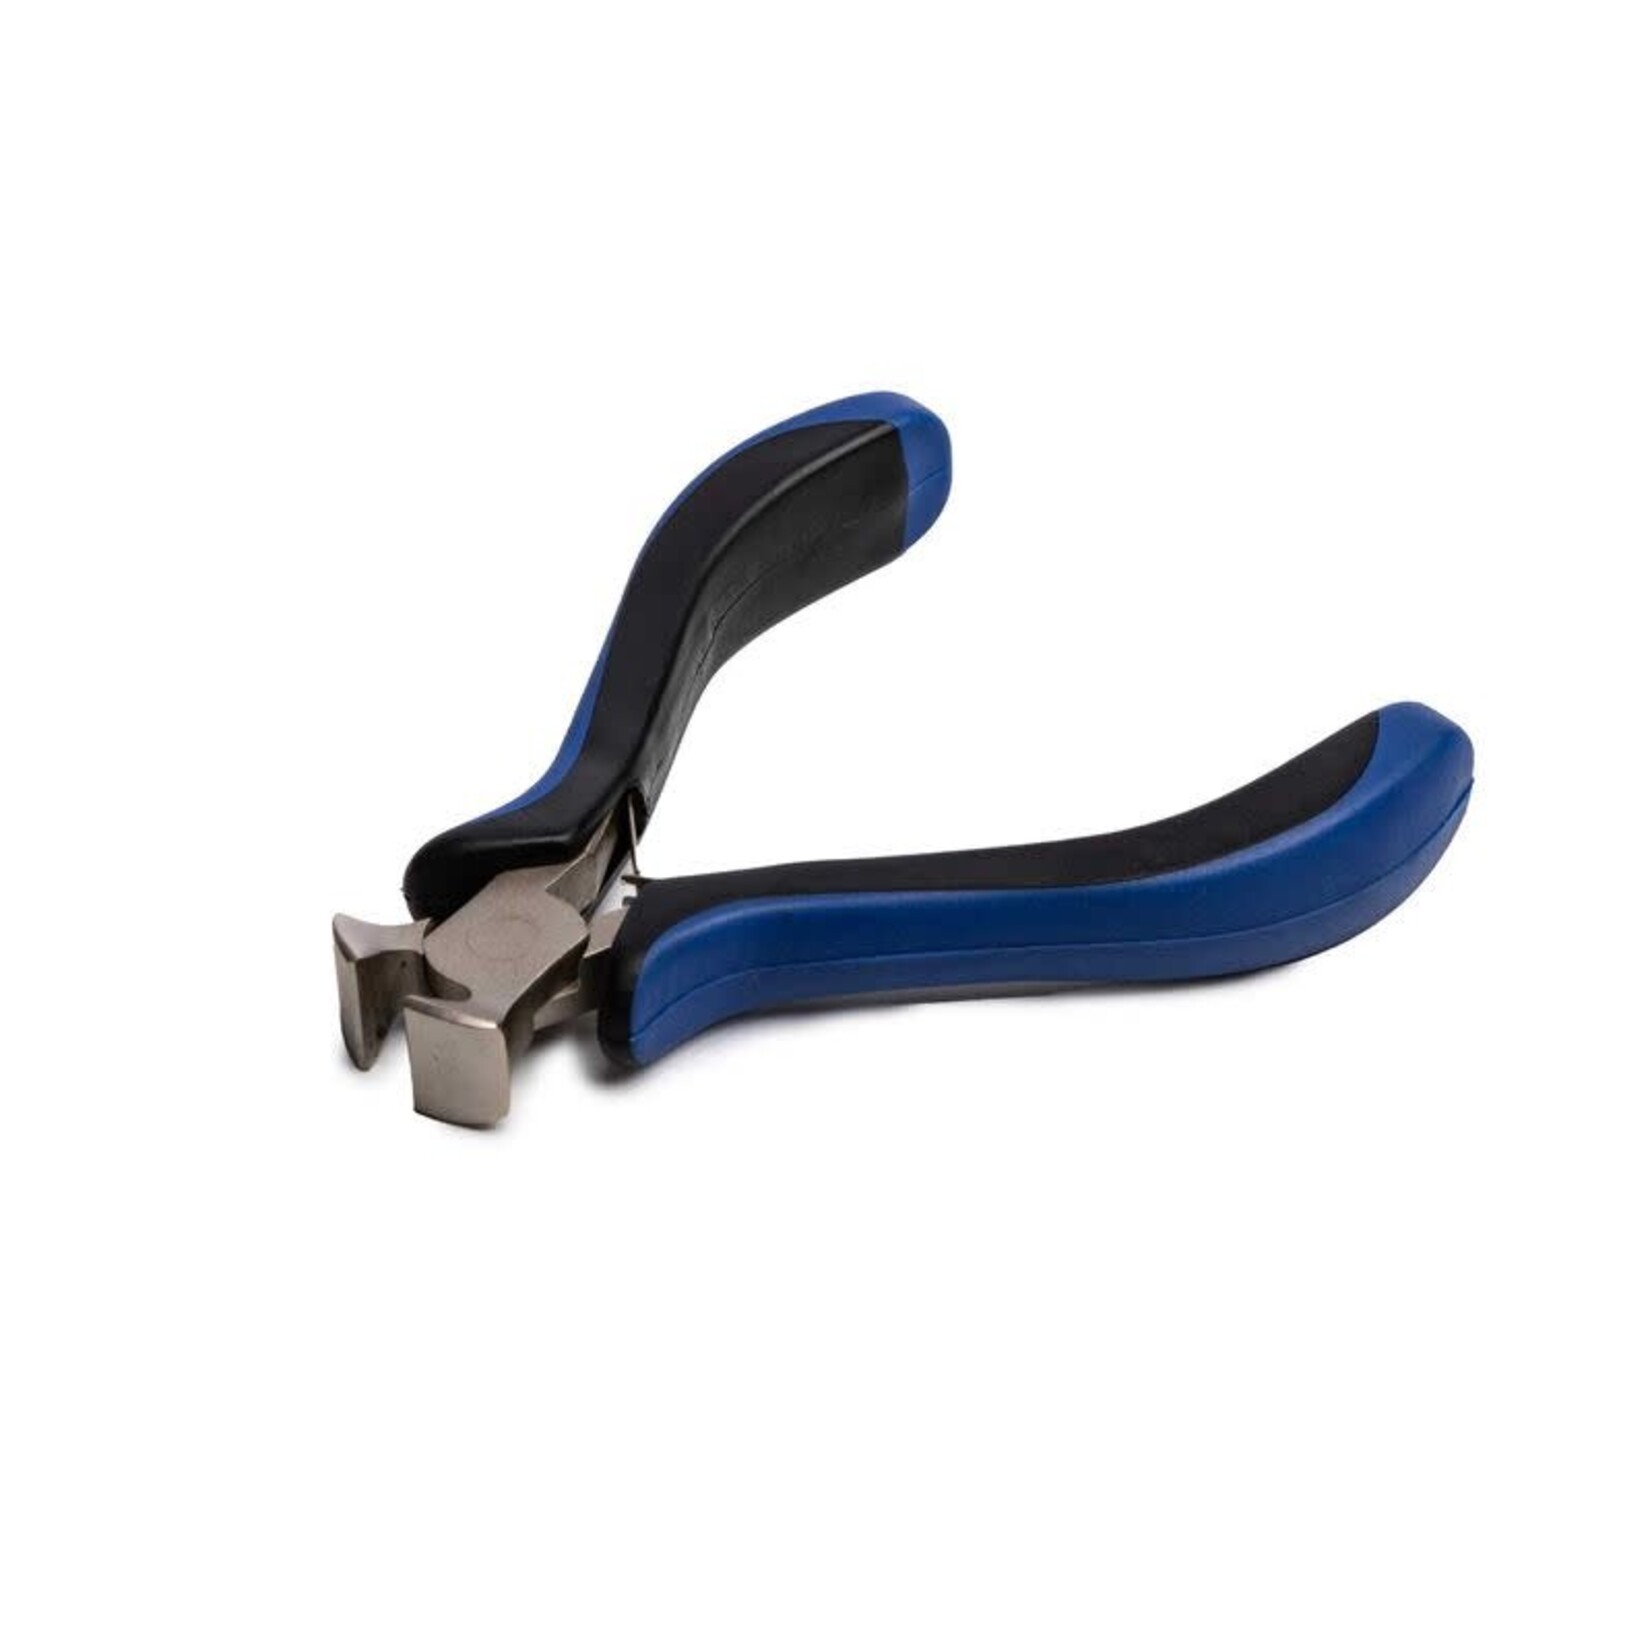 Hobby Essentials HDXK0137 Hobby Essentials PLIERS SPRINGLOADED END NIPPER